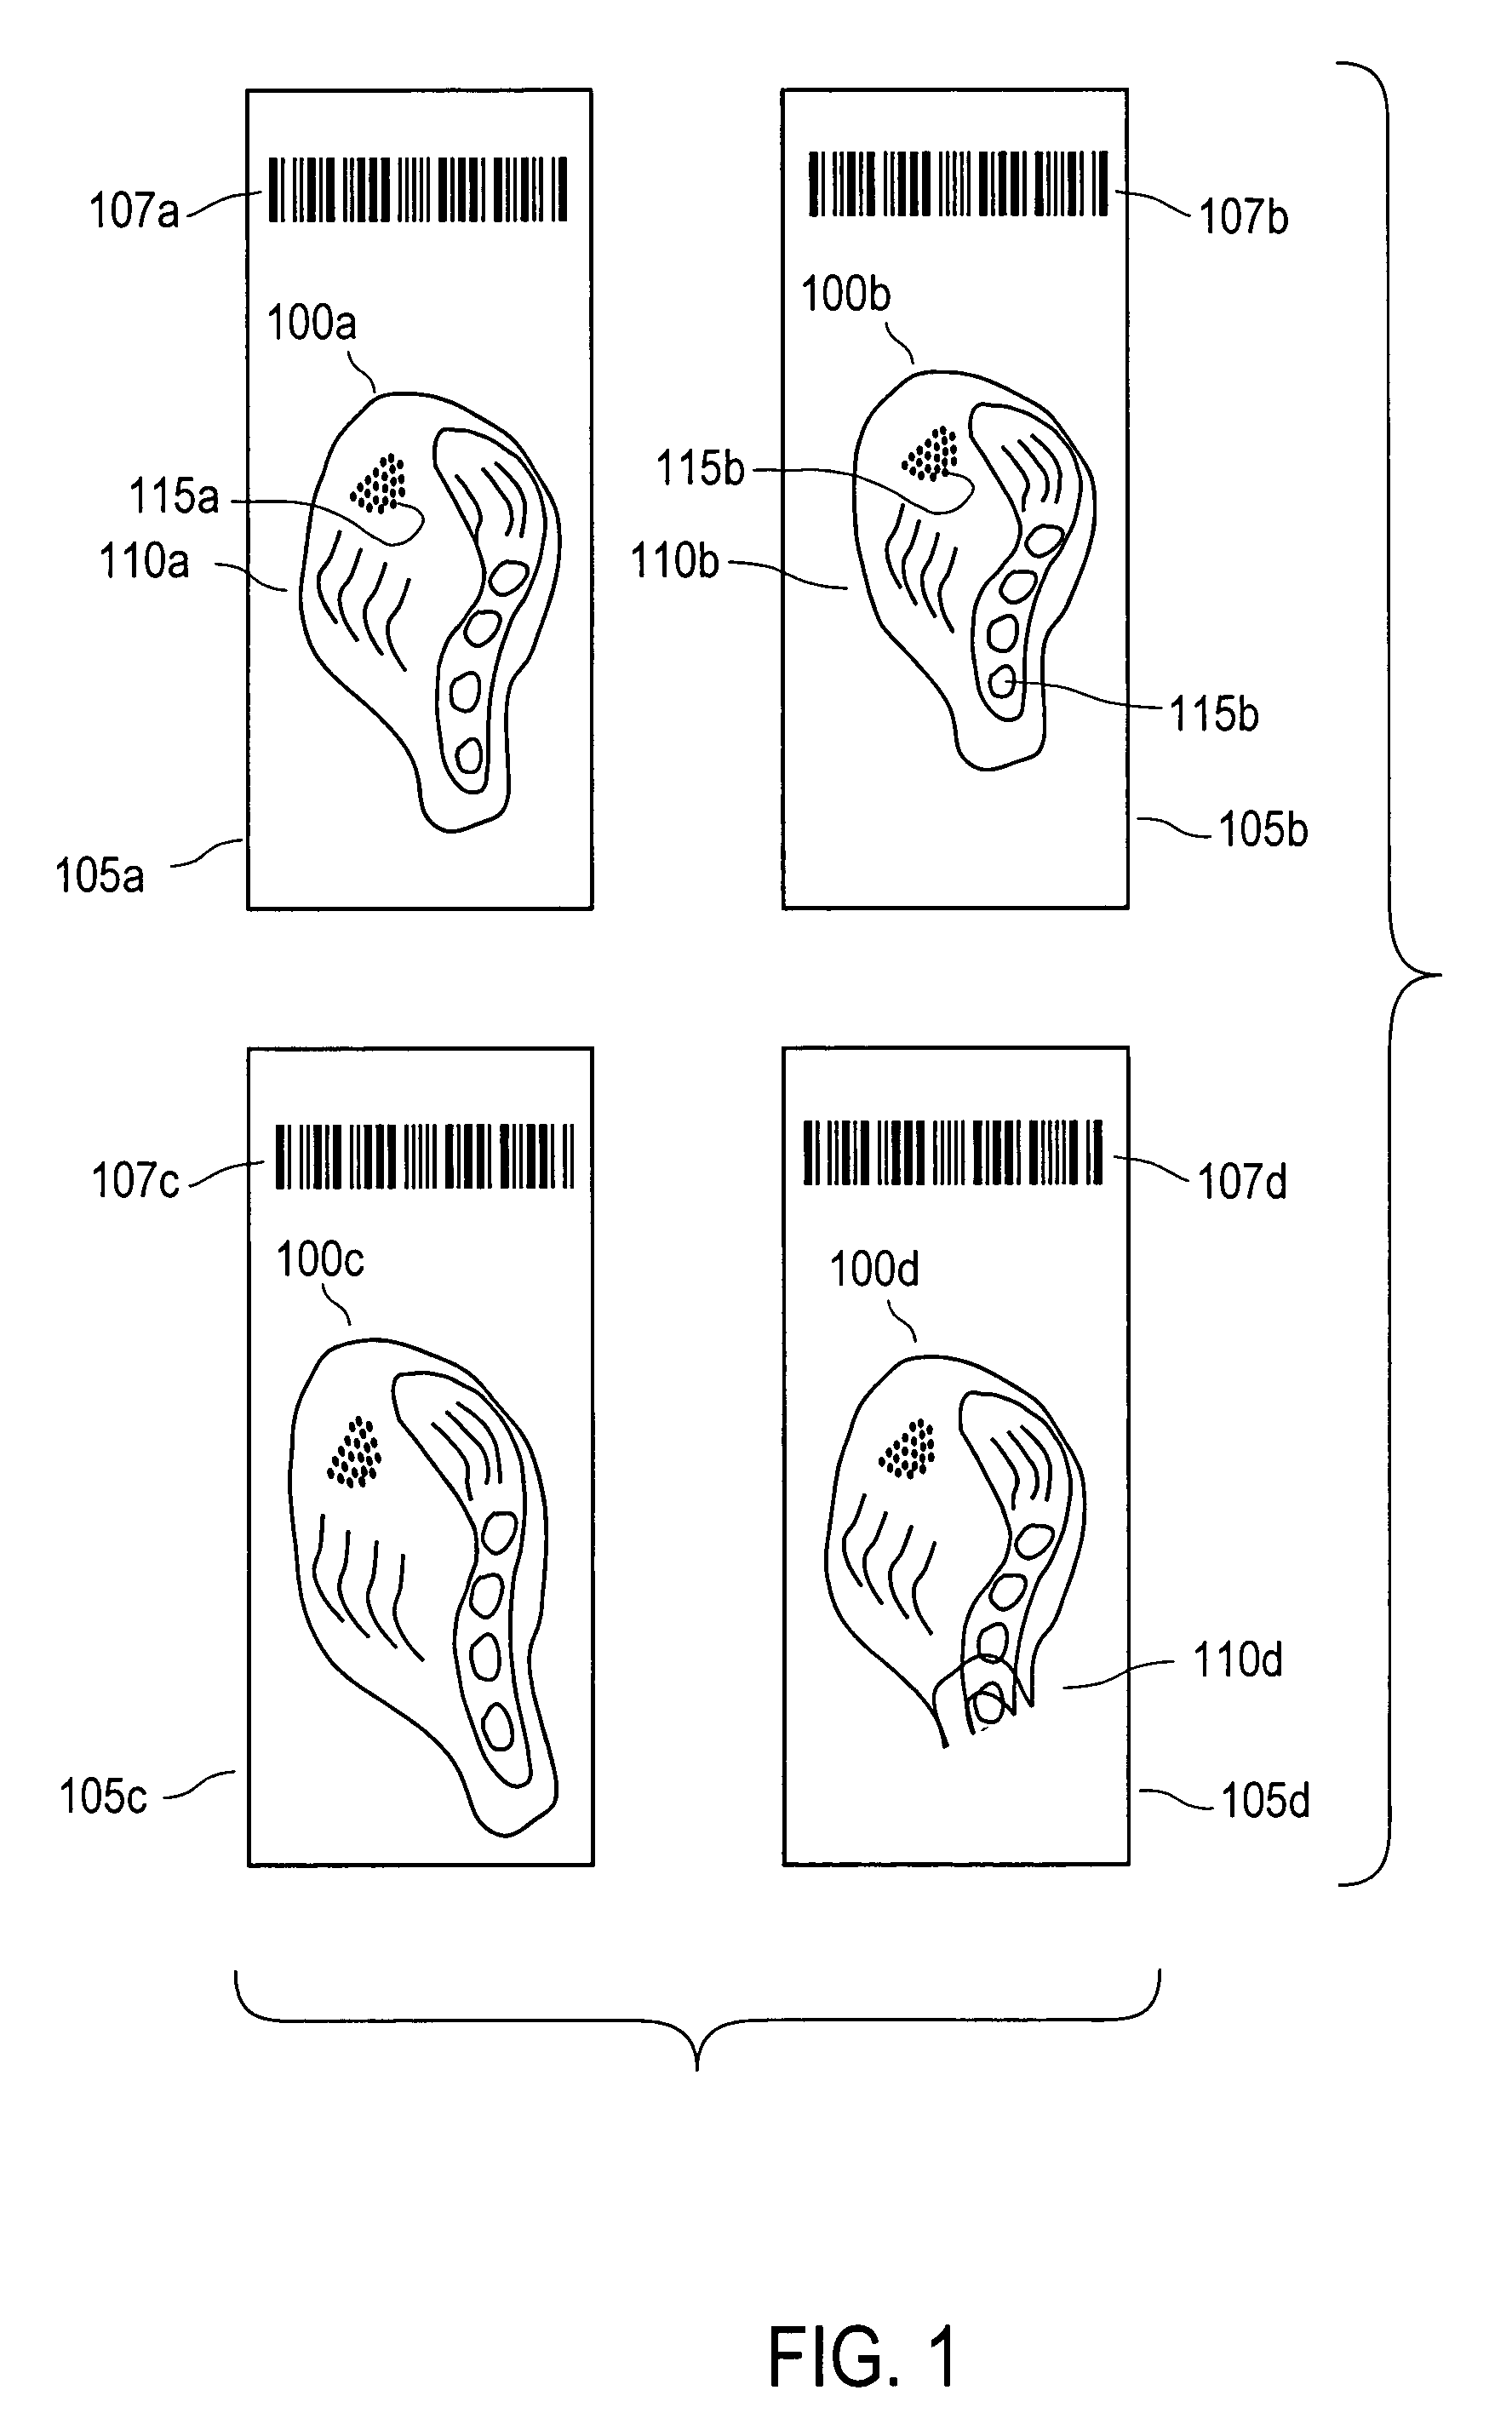 Linking of images to enable simultaneous viewing of multiple objects